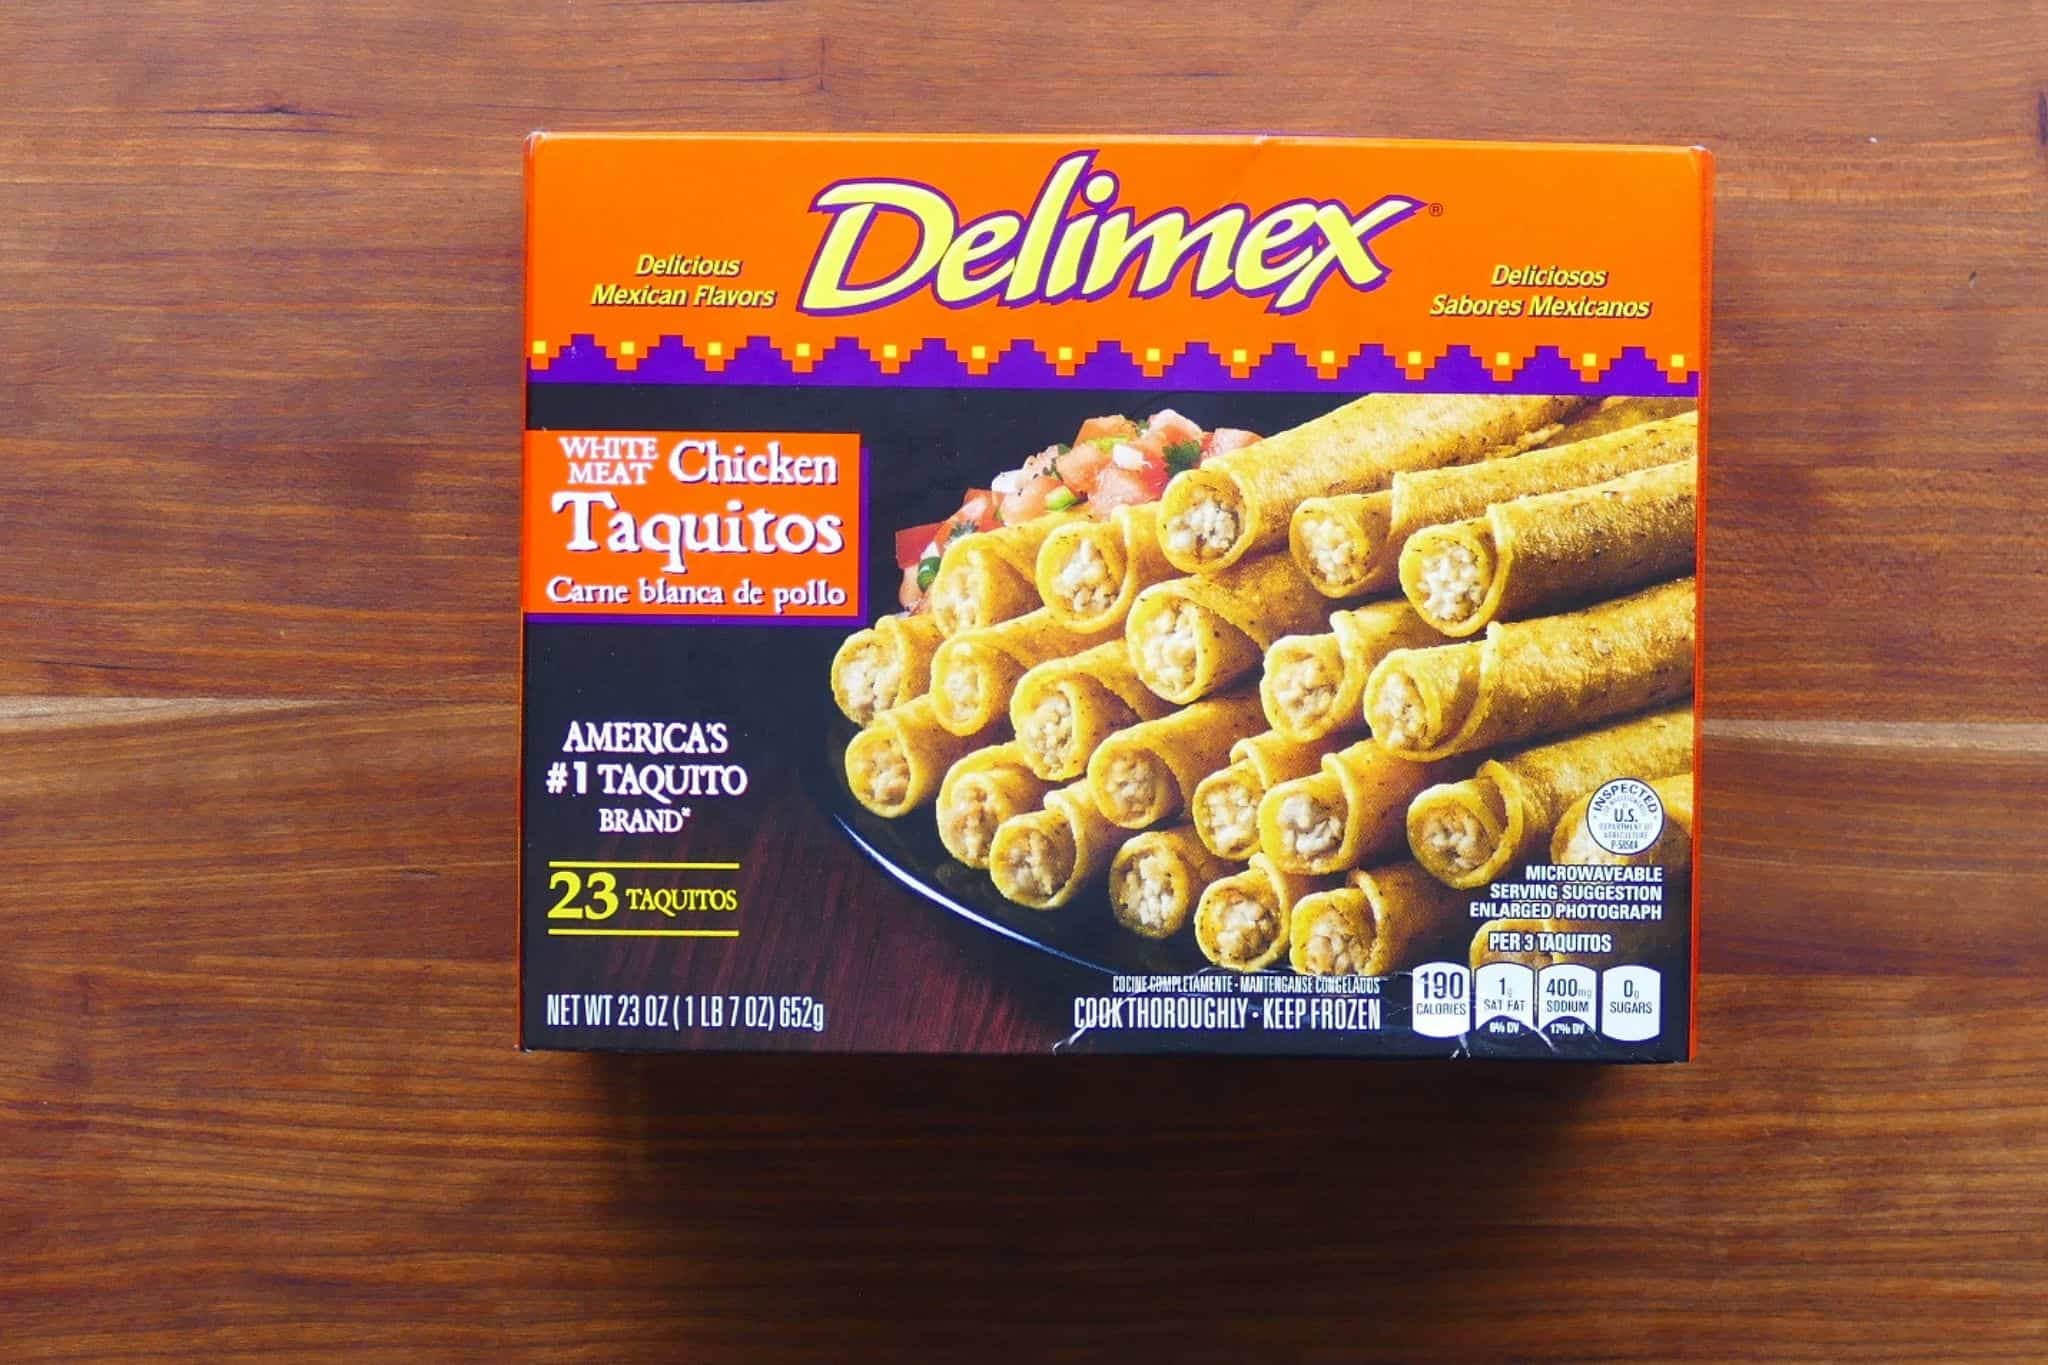 Delimex brand white meat chicken taquitos box with orange and purple design and stacked taquitos photo